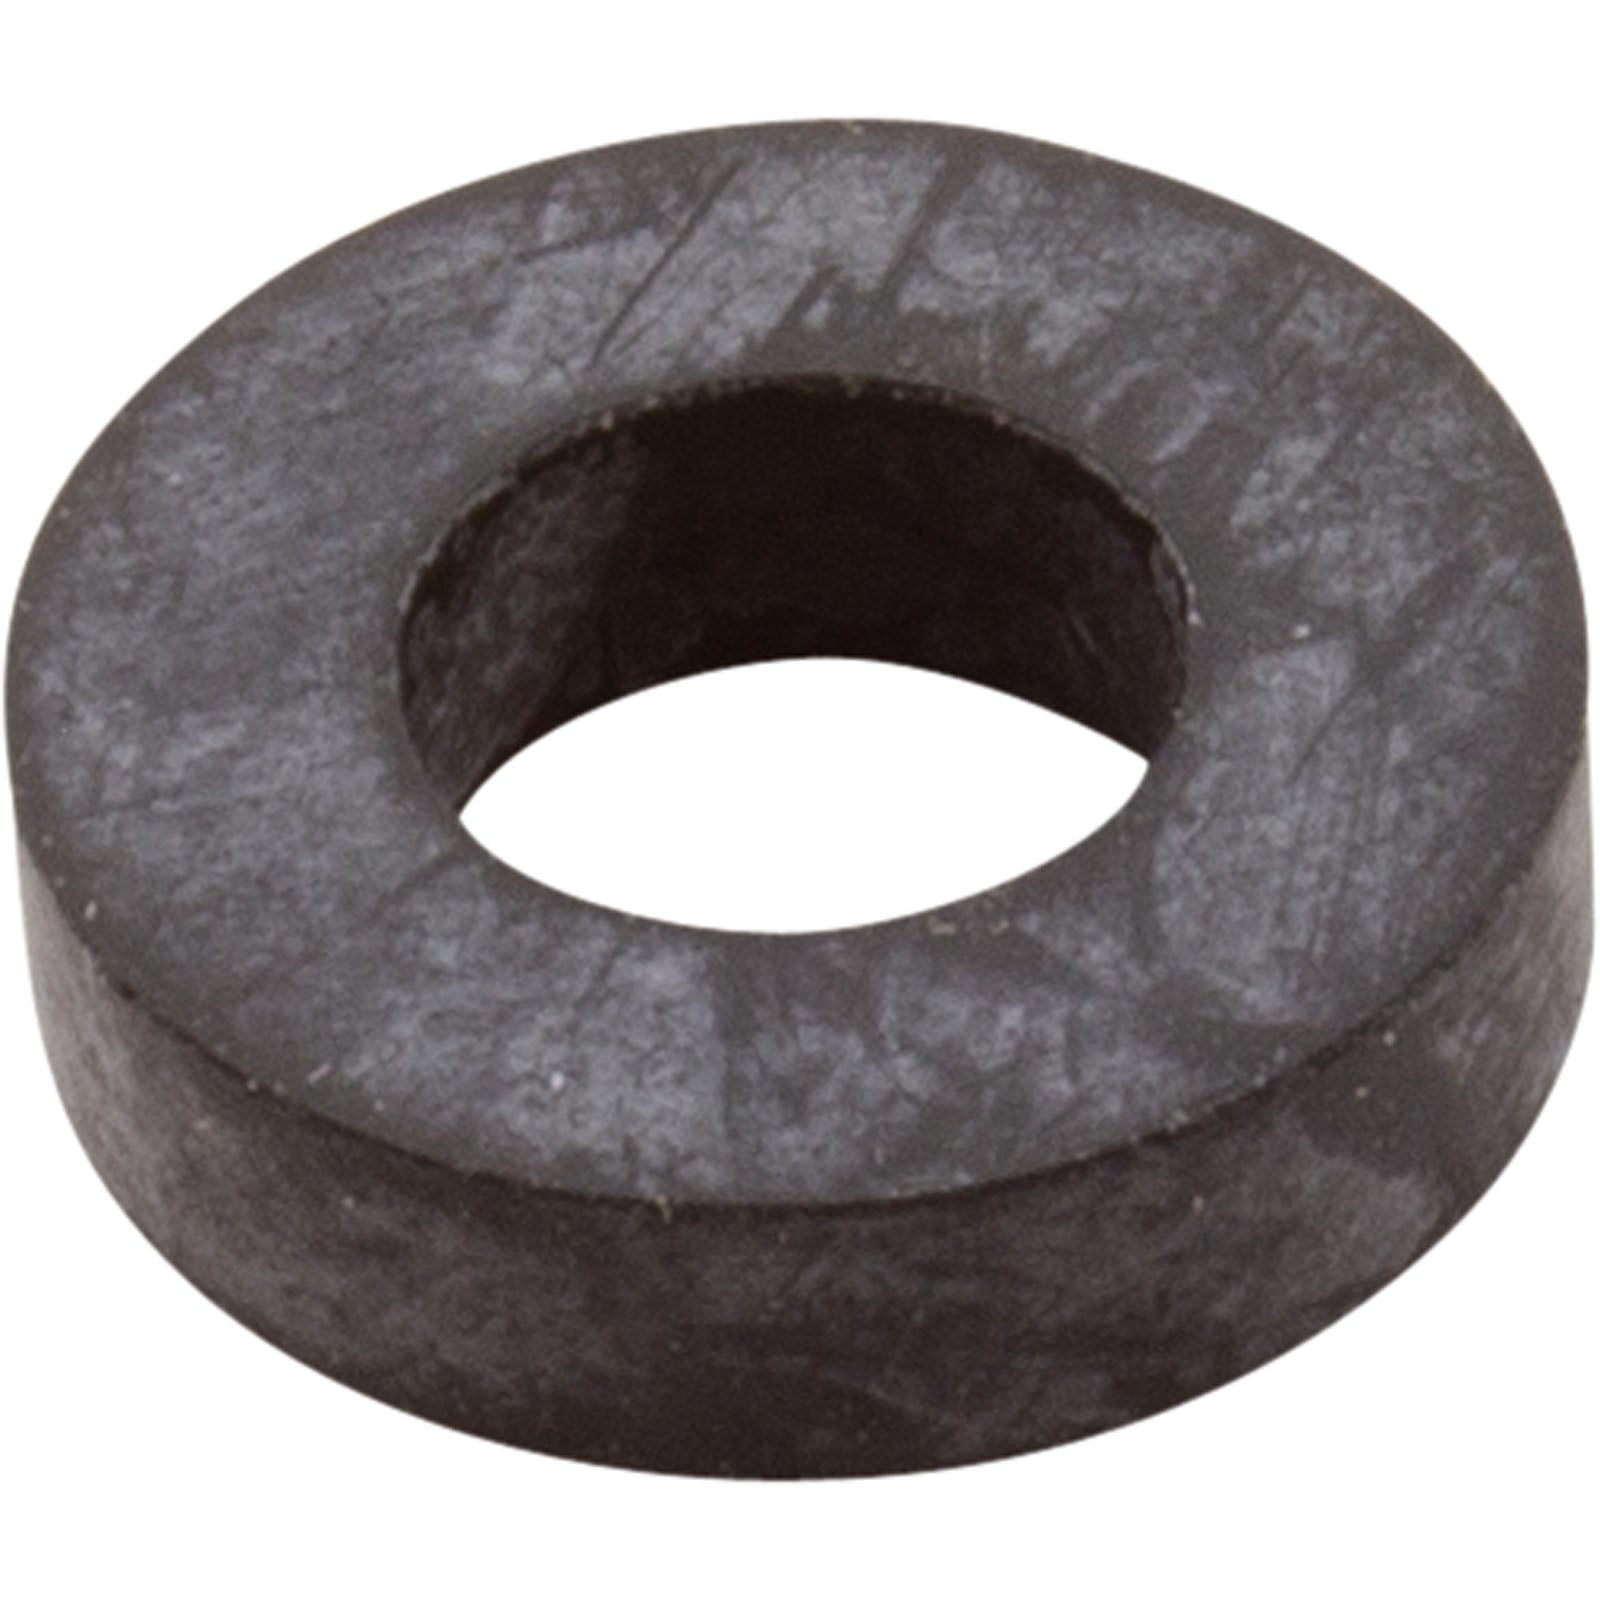 Rubber Washer- 075713